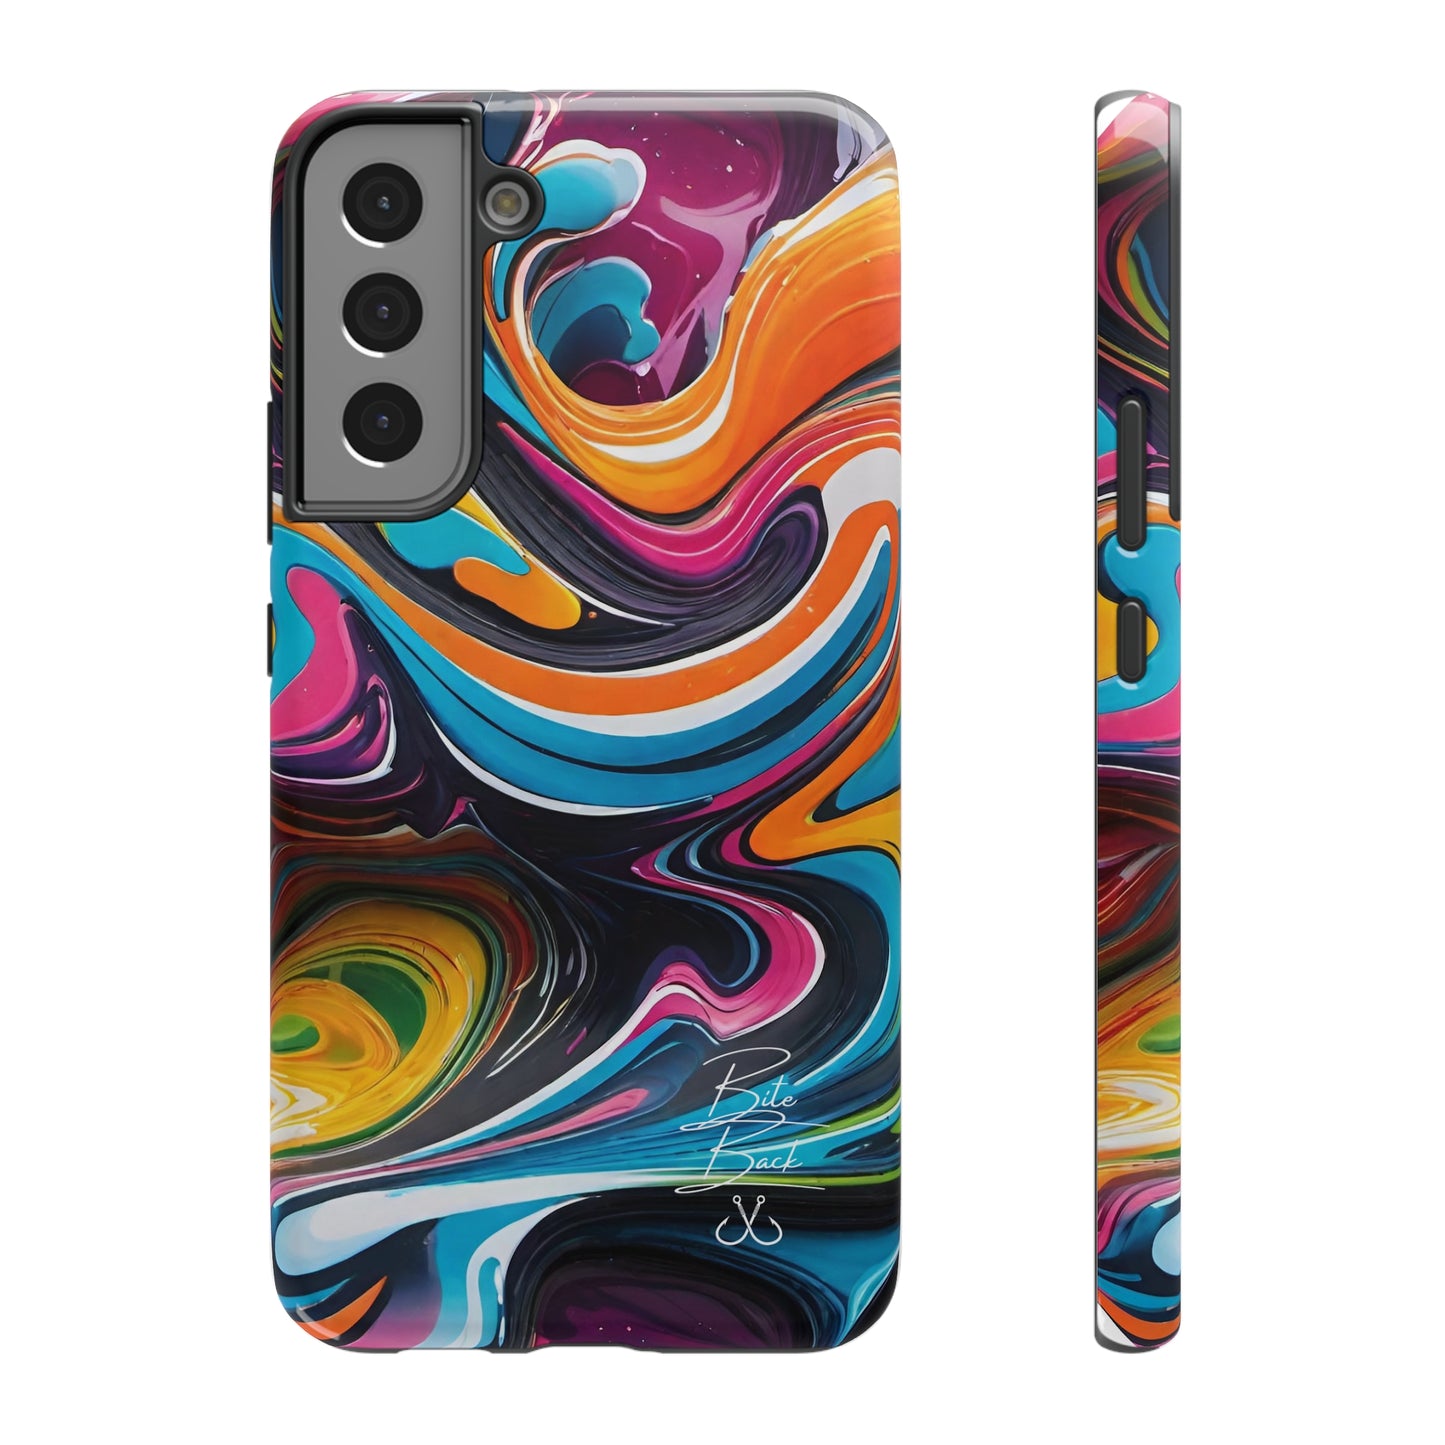 Colorful Impact-Resistant Cases